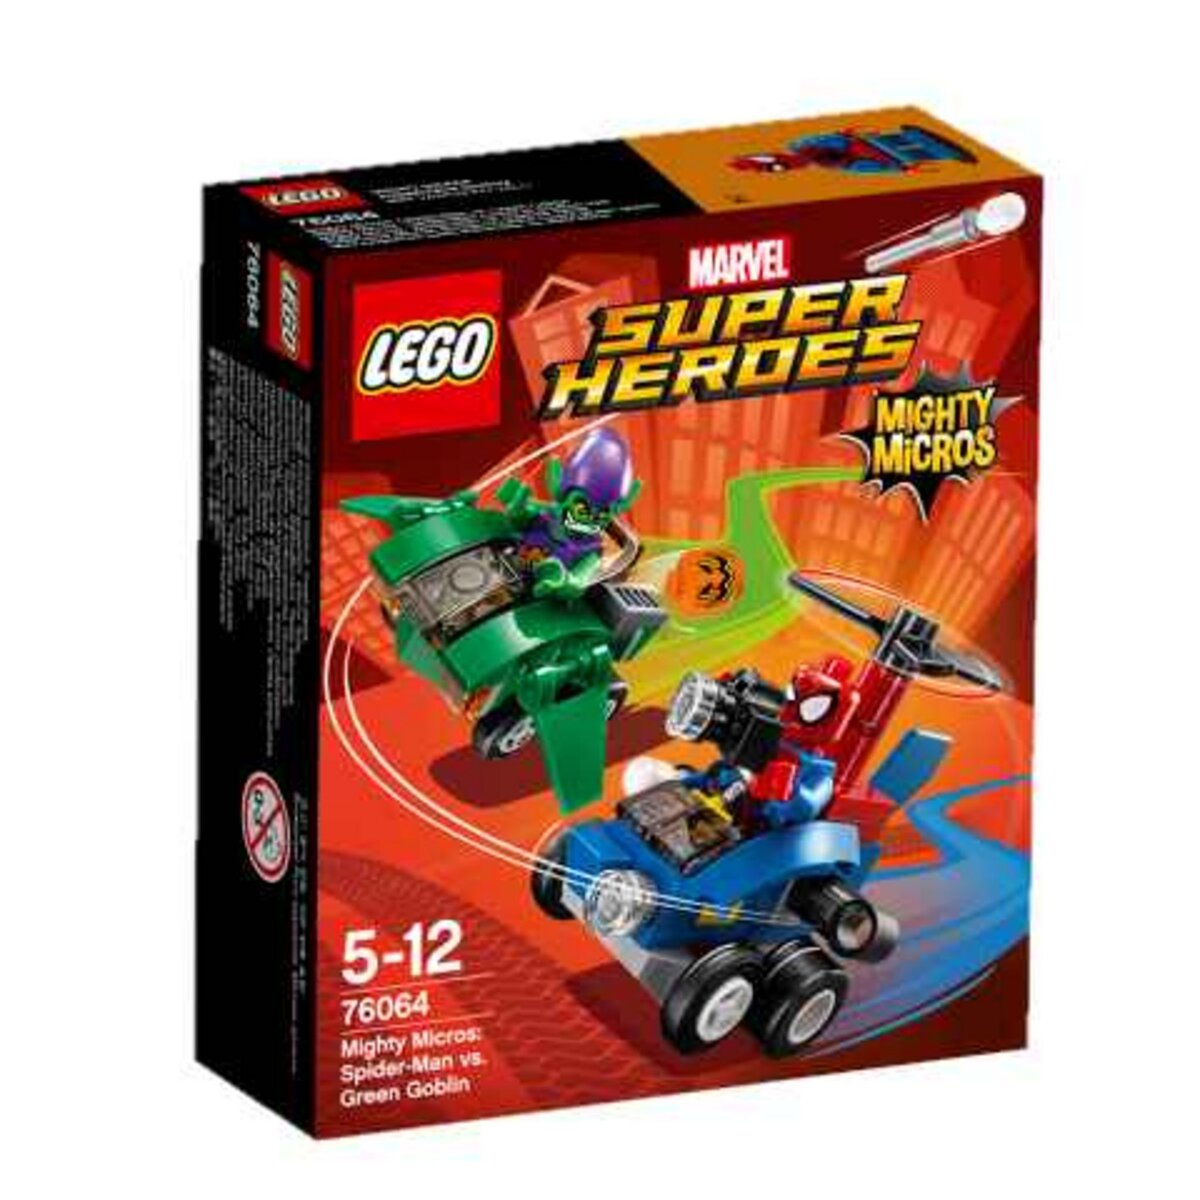 LEGO Super Heroes Marvel 76064 - Mighty Micros: Spider-Man contre le Bouffon Vert